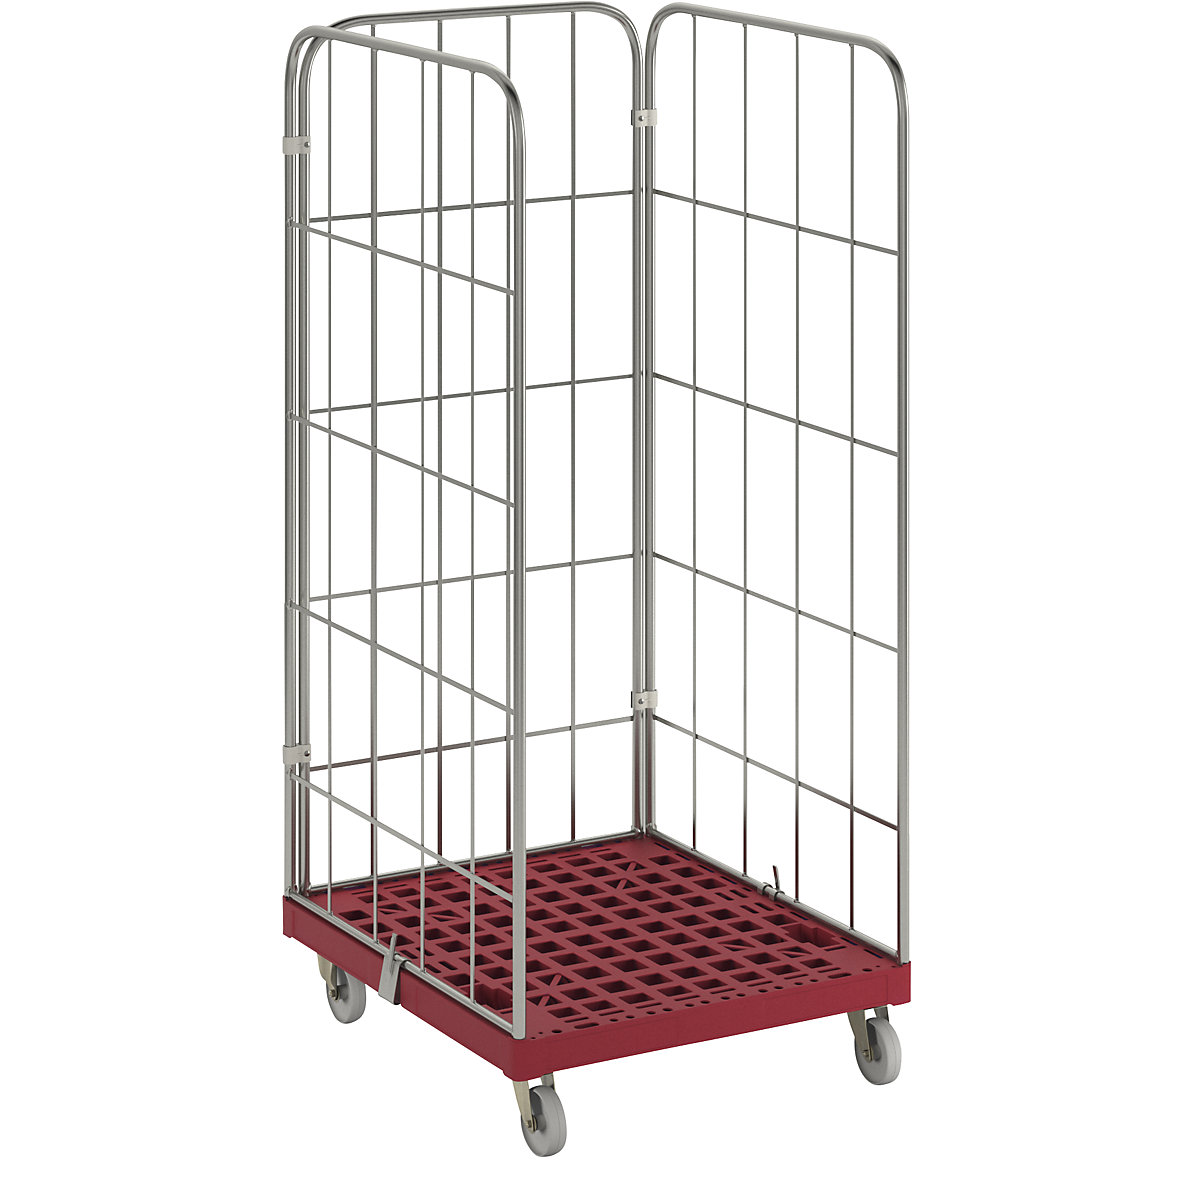 MODULAR roll container, plastic transport dolly, mesh on 3 sides, red dolly-13